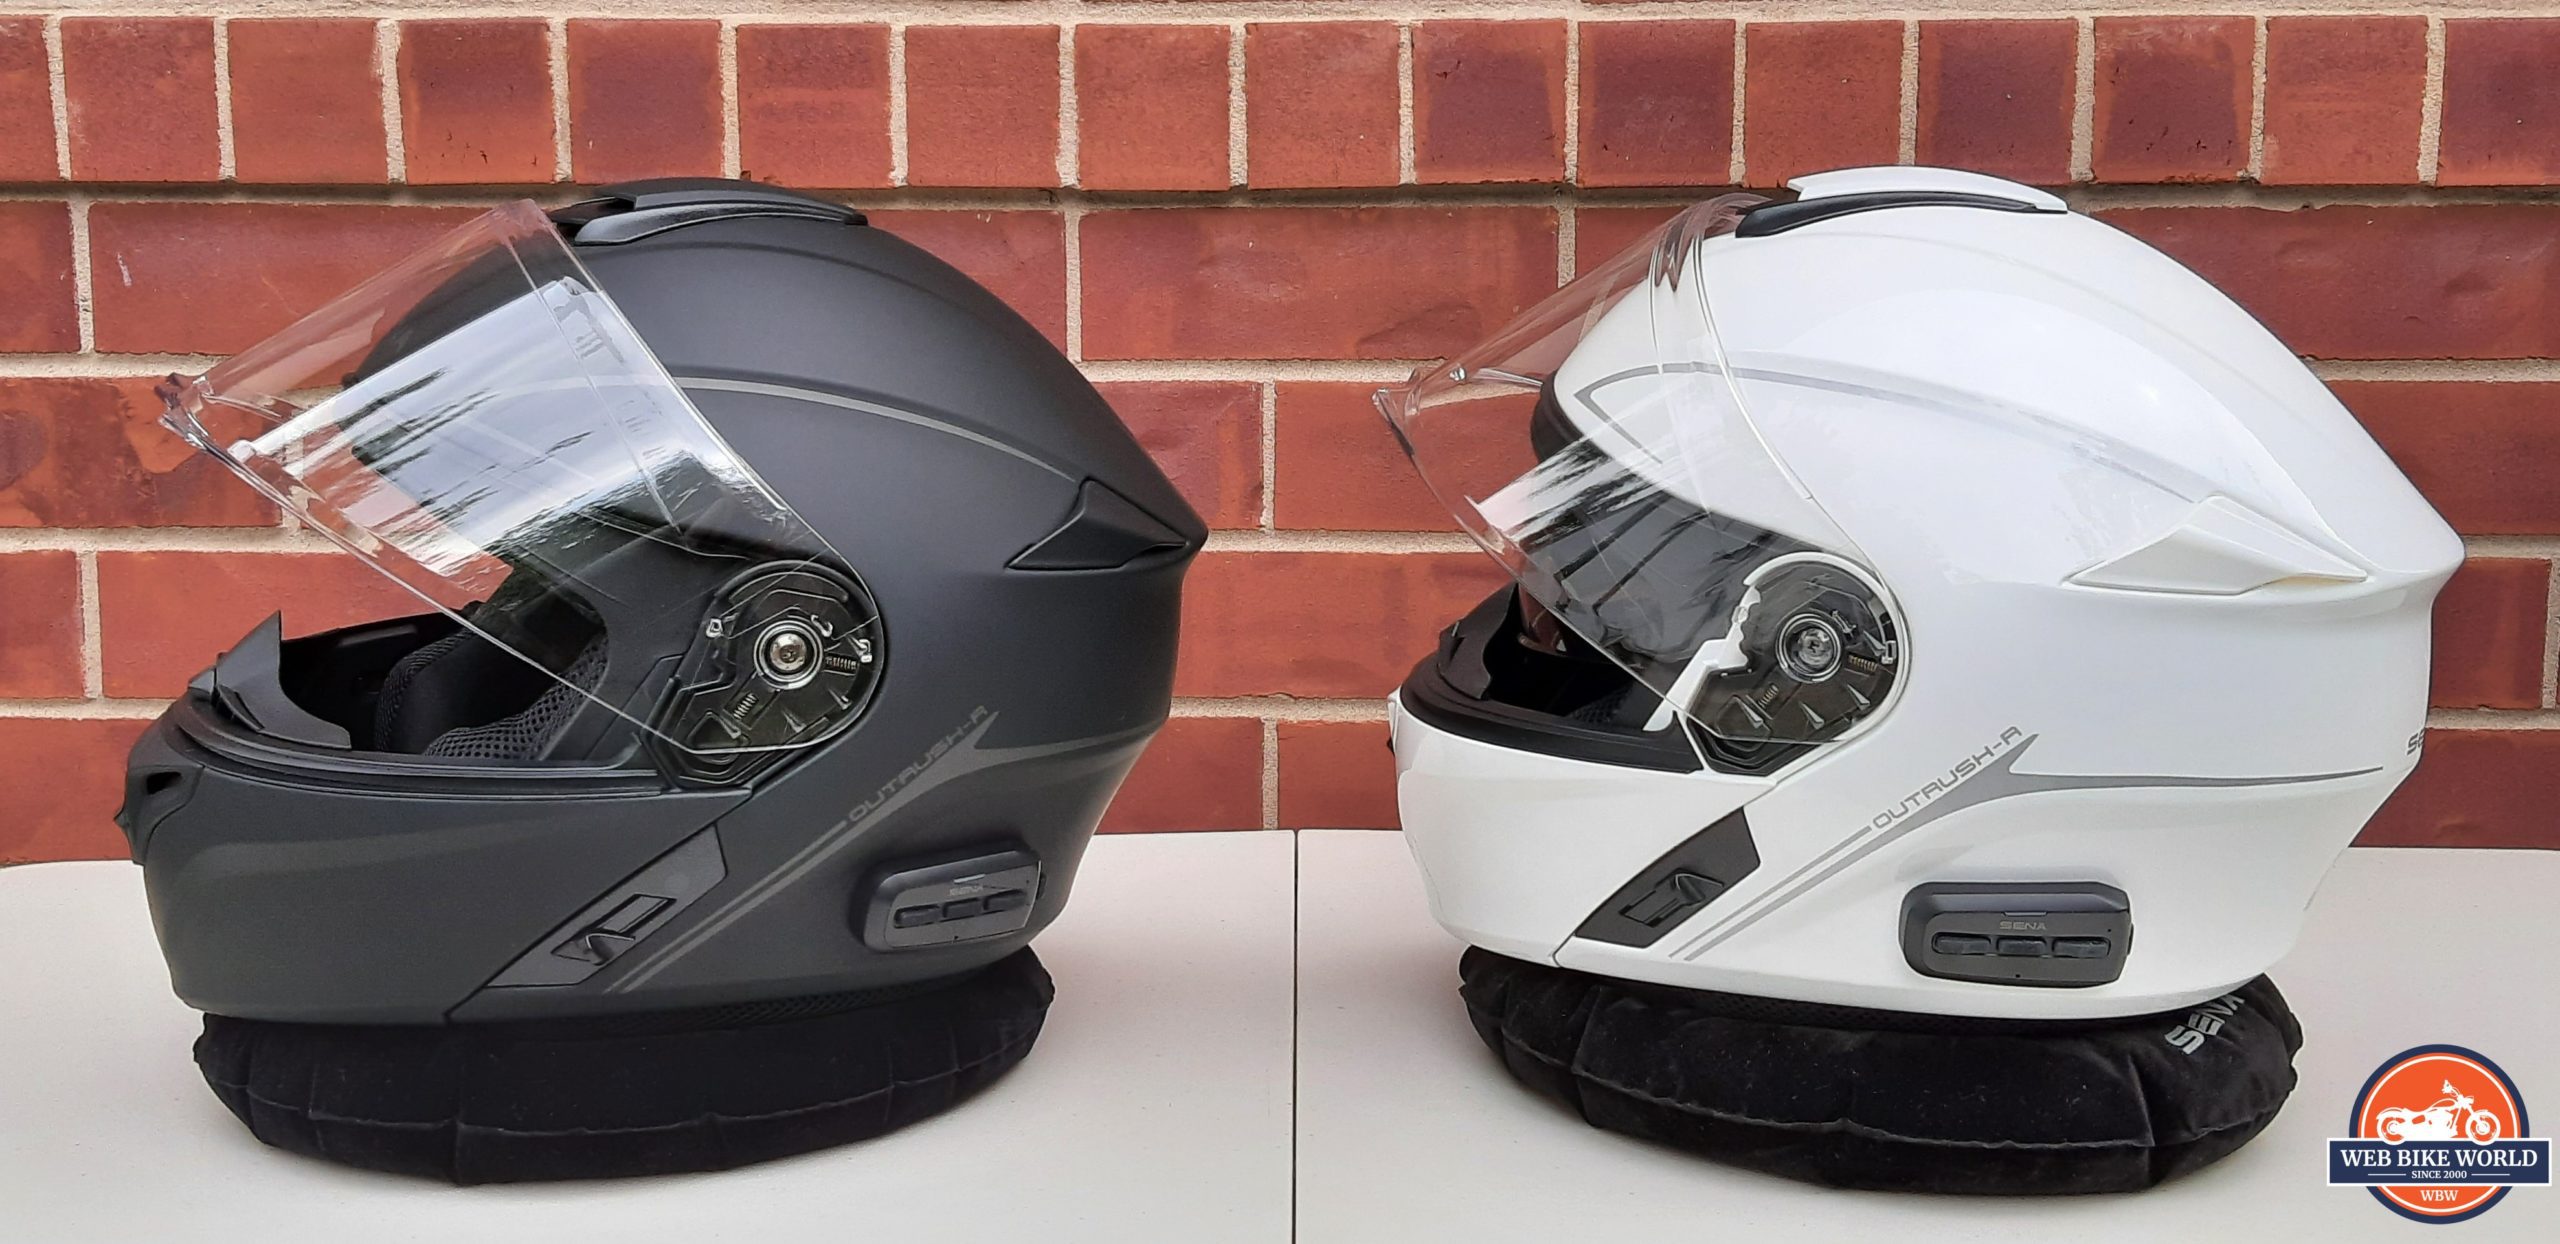 A view of the Outrush R Modular Helmet colors